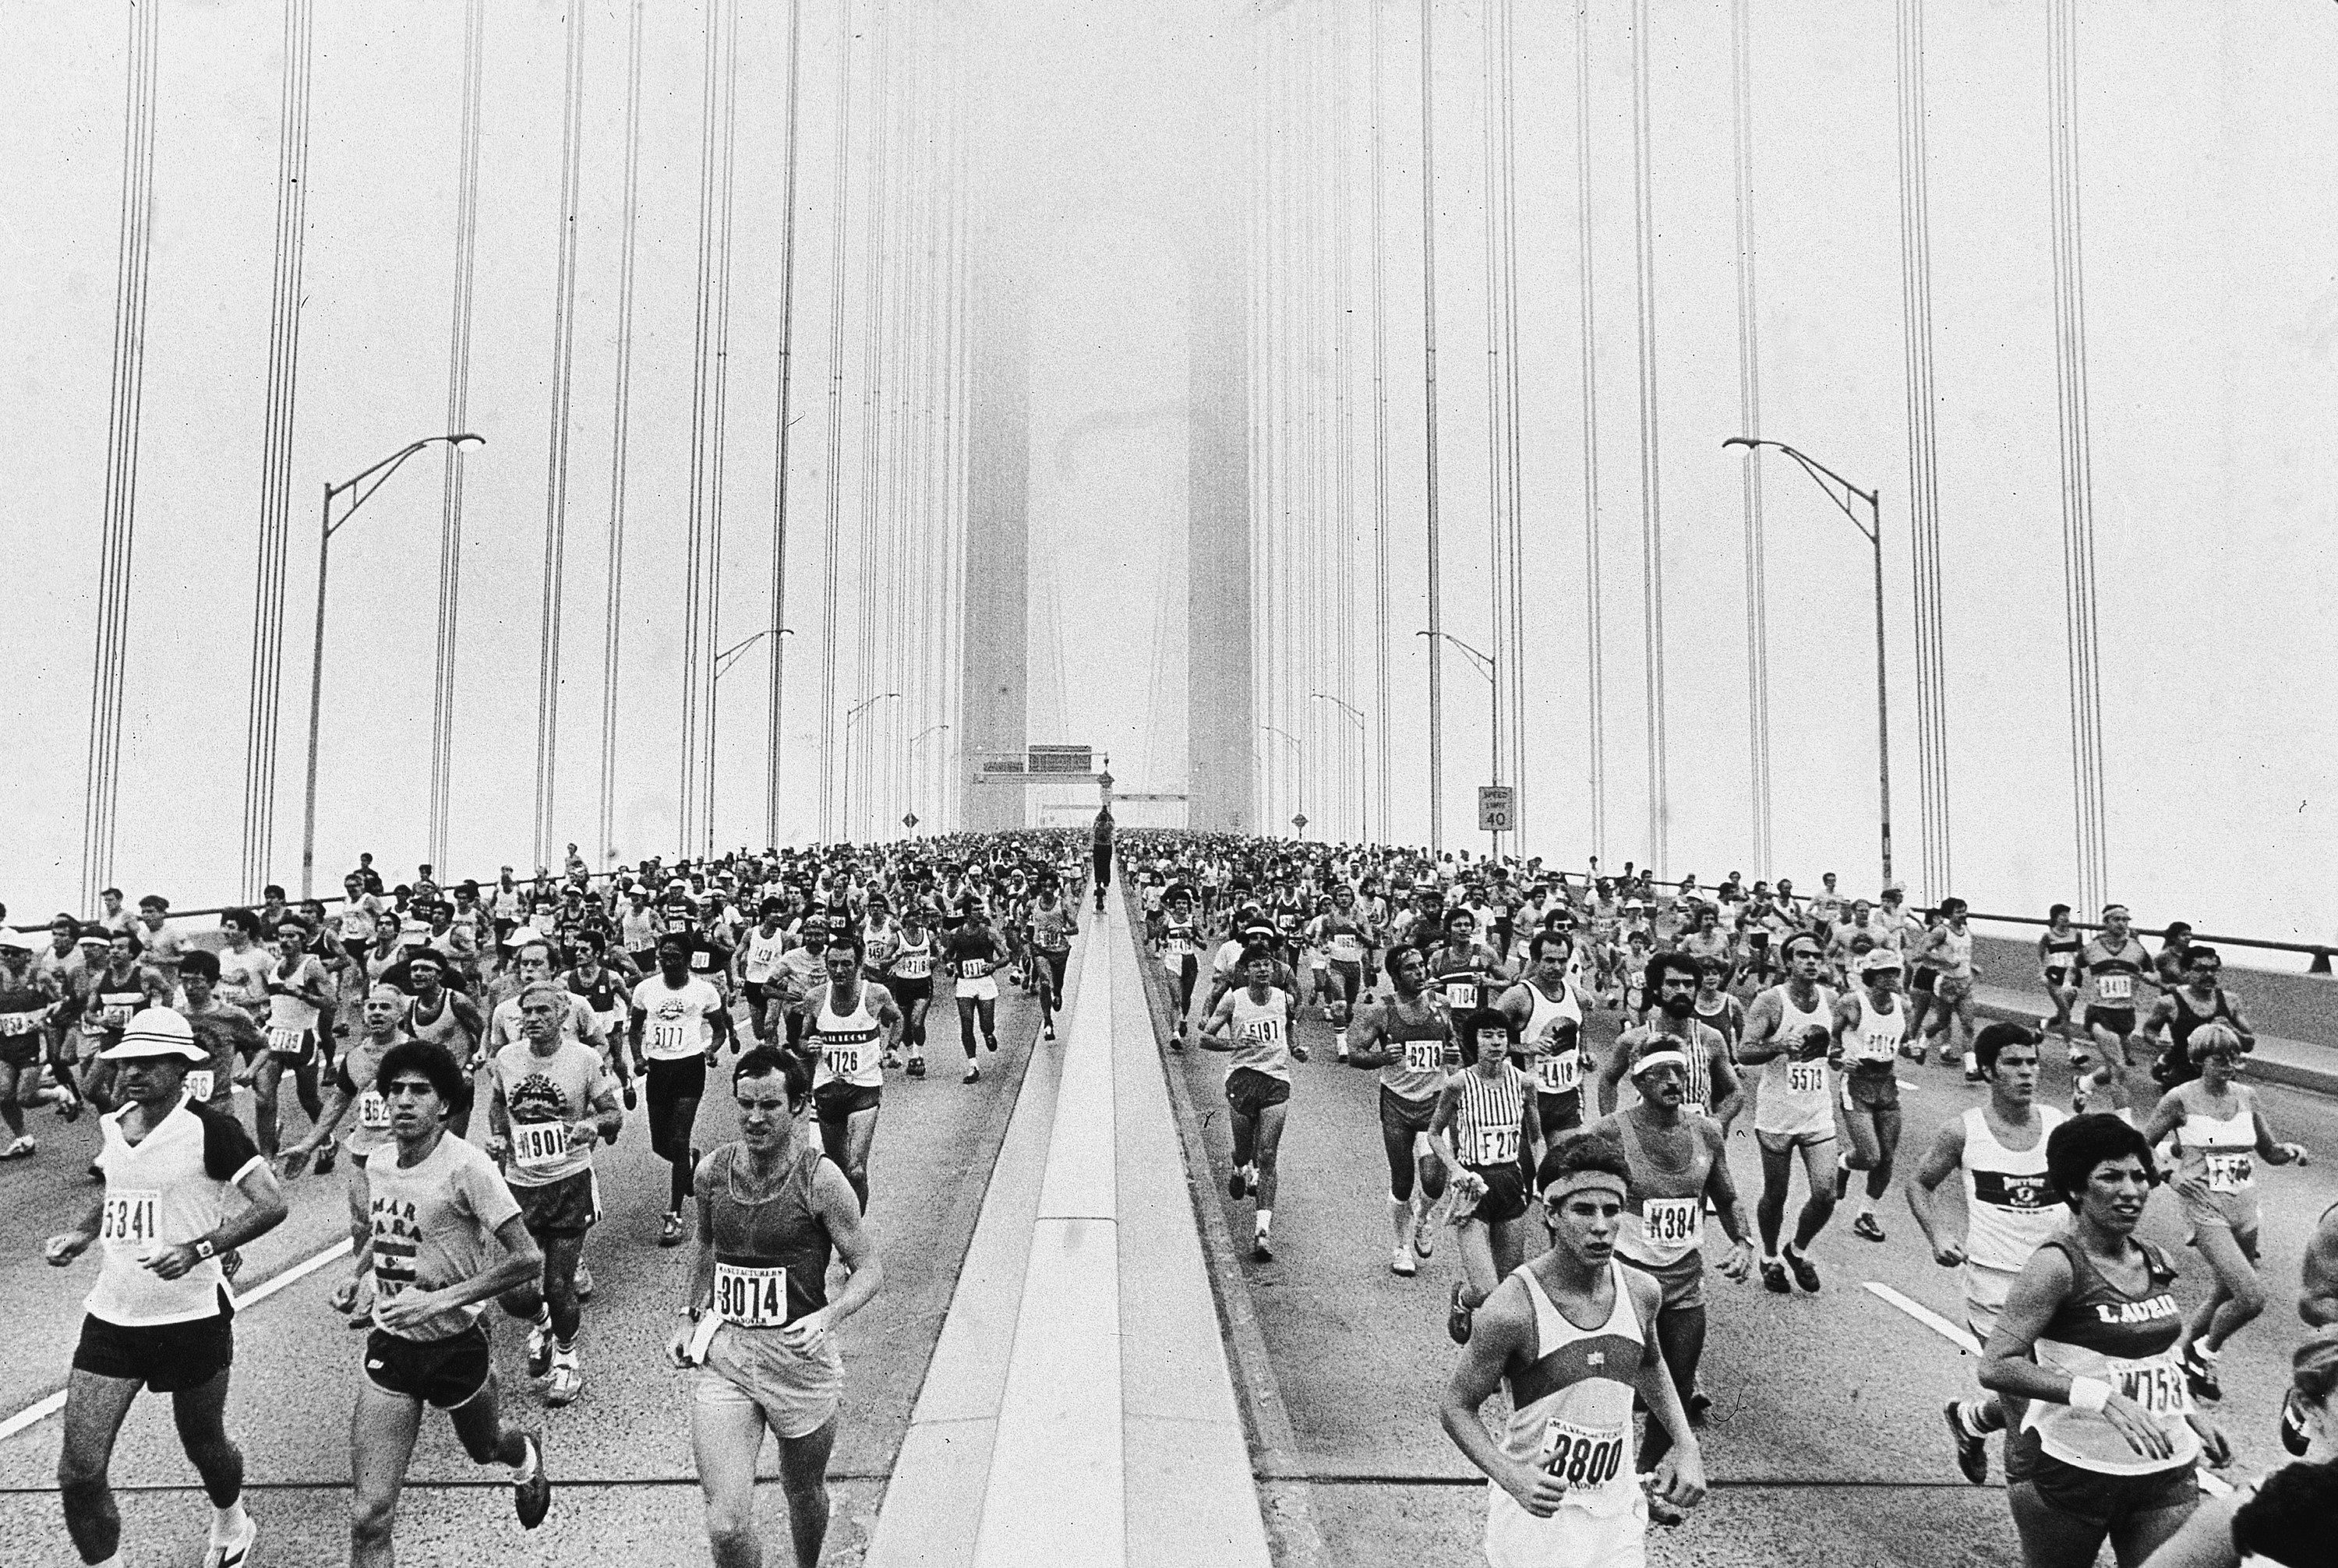 Wide black-and-white shot of runners